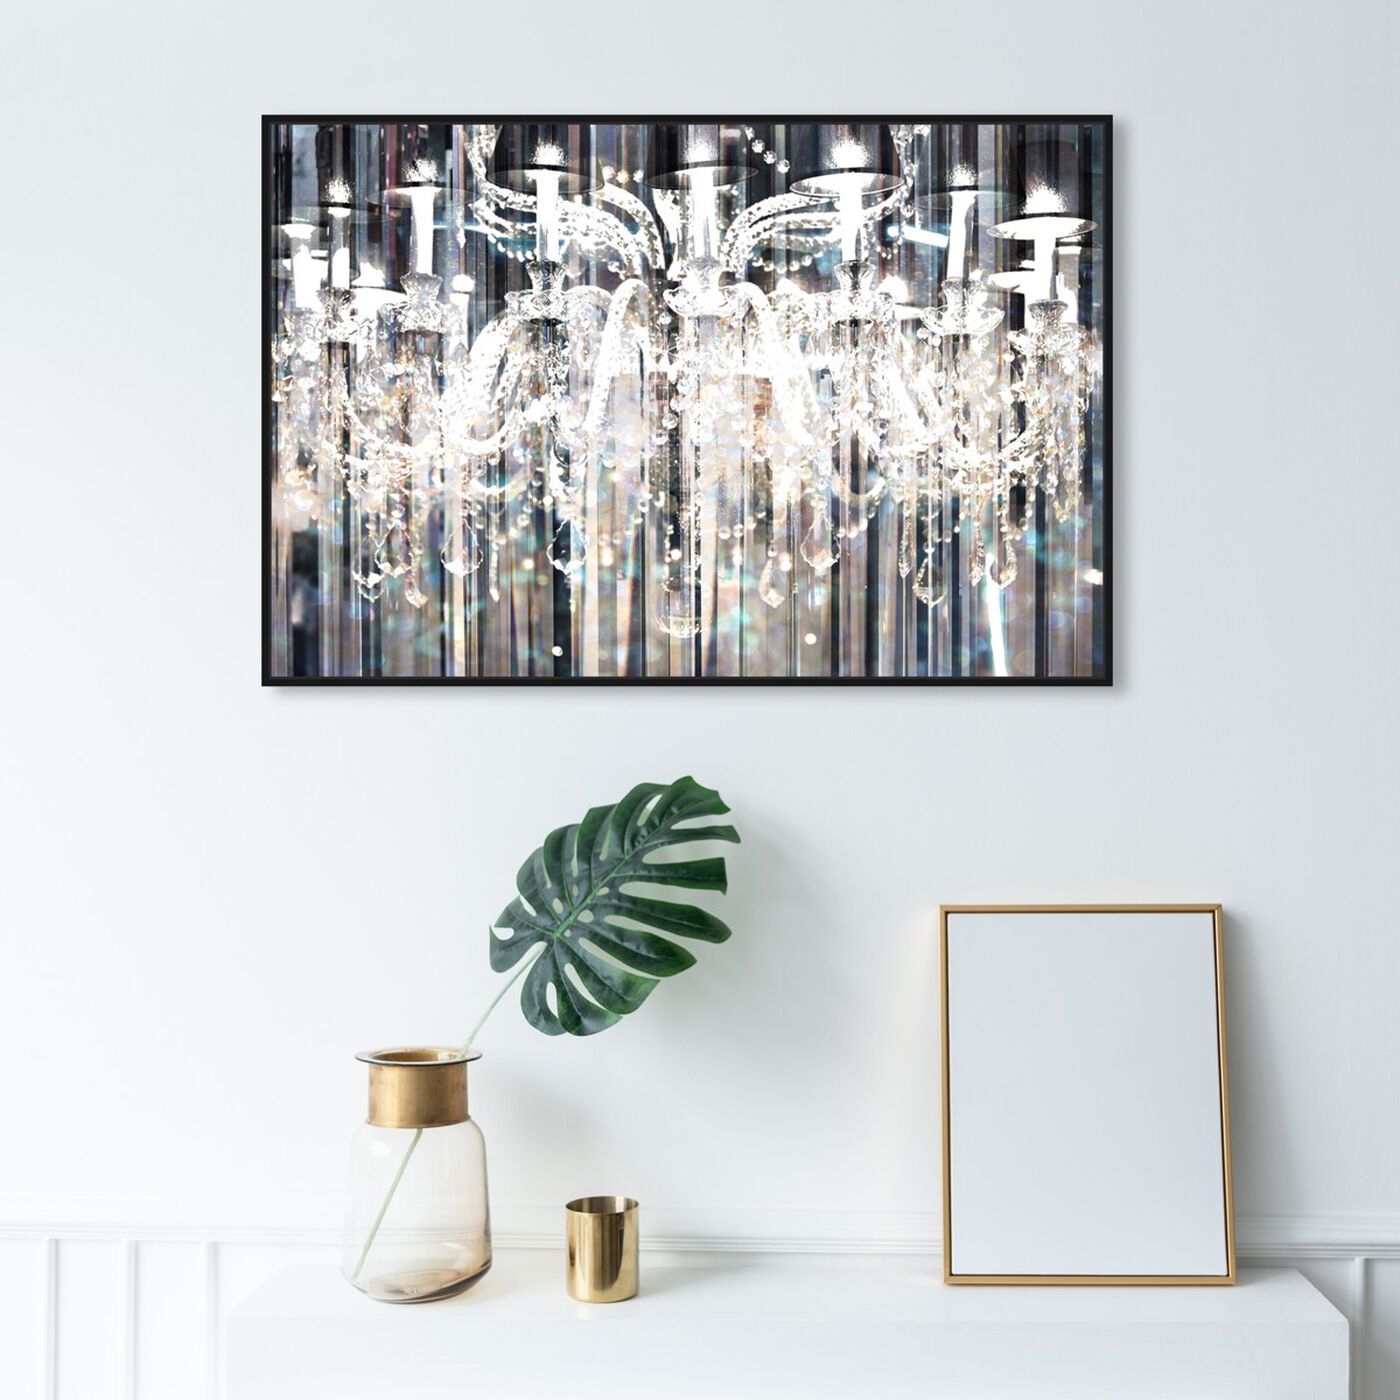 Hanging view of Diamond Shower featuring fashion and glam and chandeliers art.